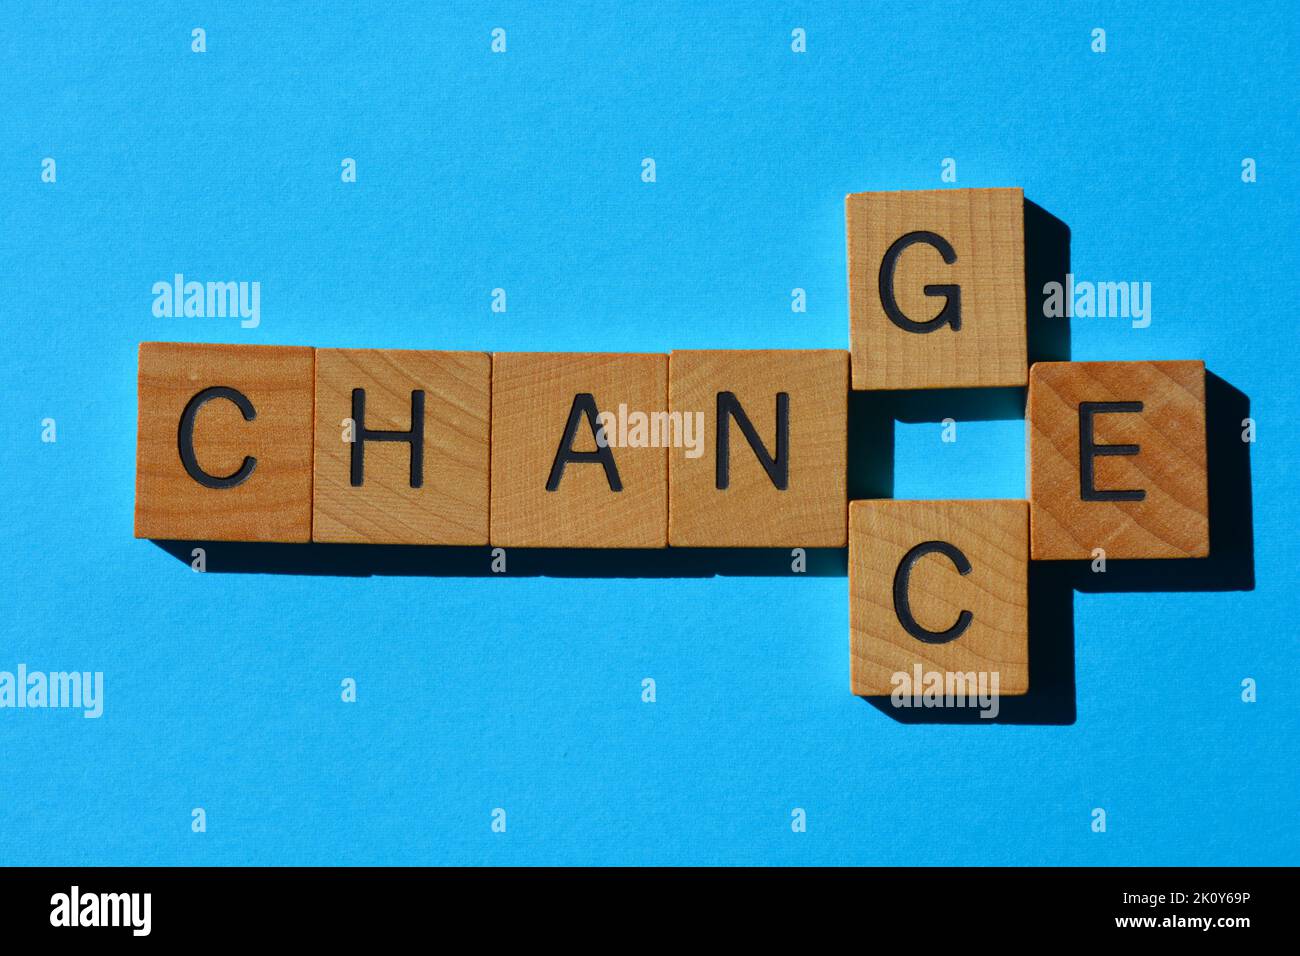 Chance, Change, word play with interchangeable letter C and G, wooden alphabet letters isolated on blue background Stock Photo